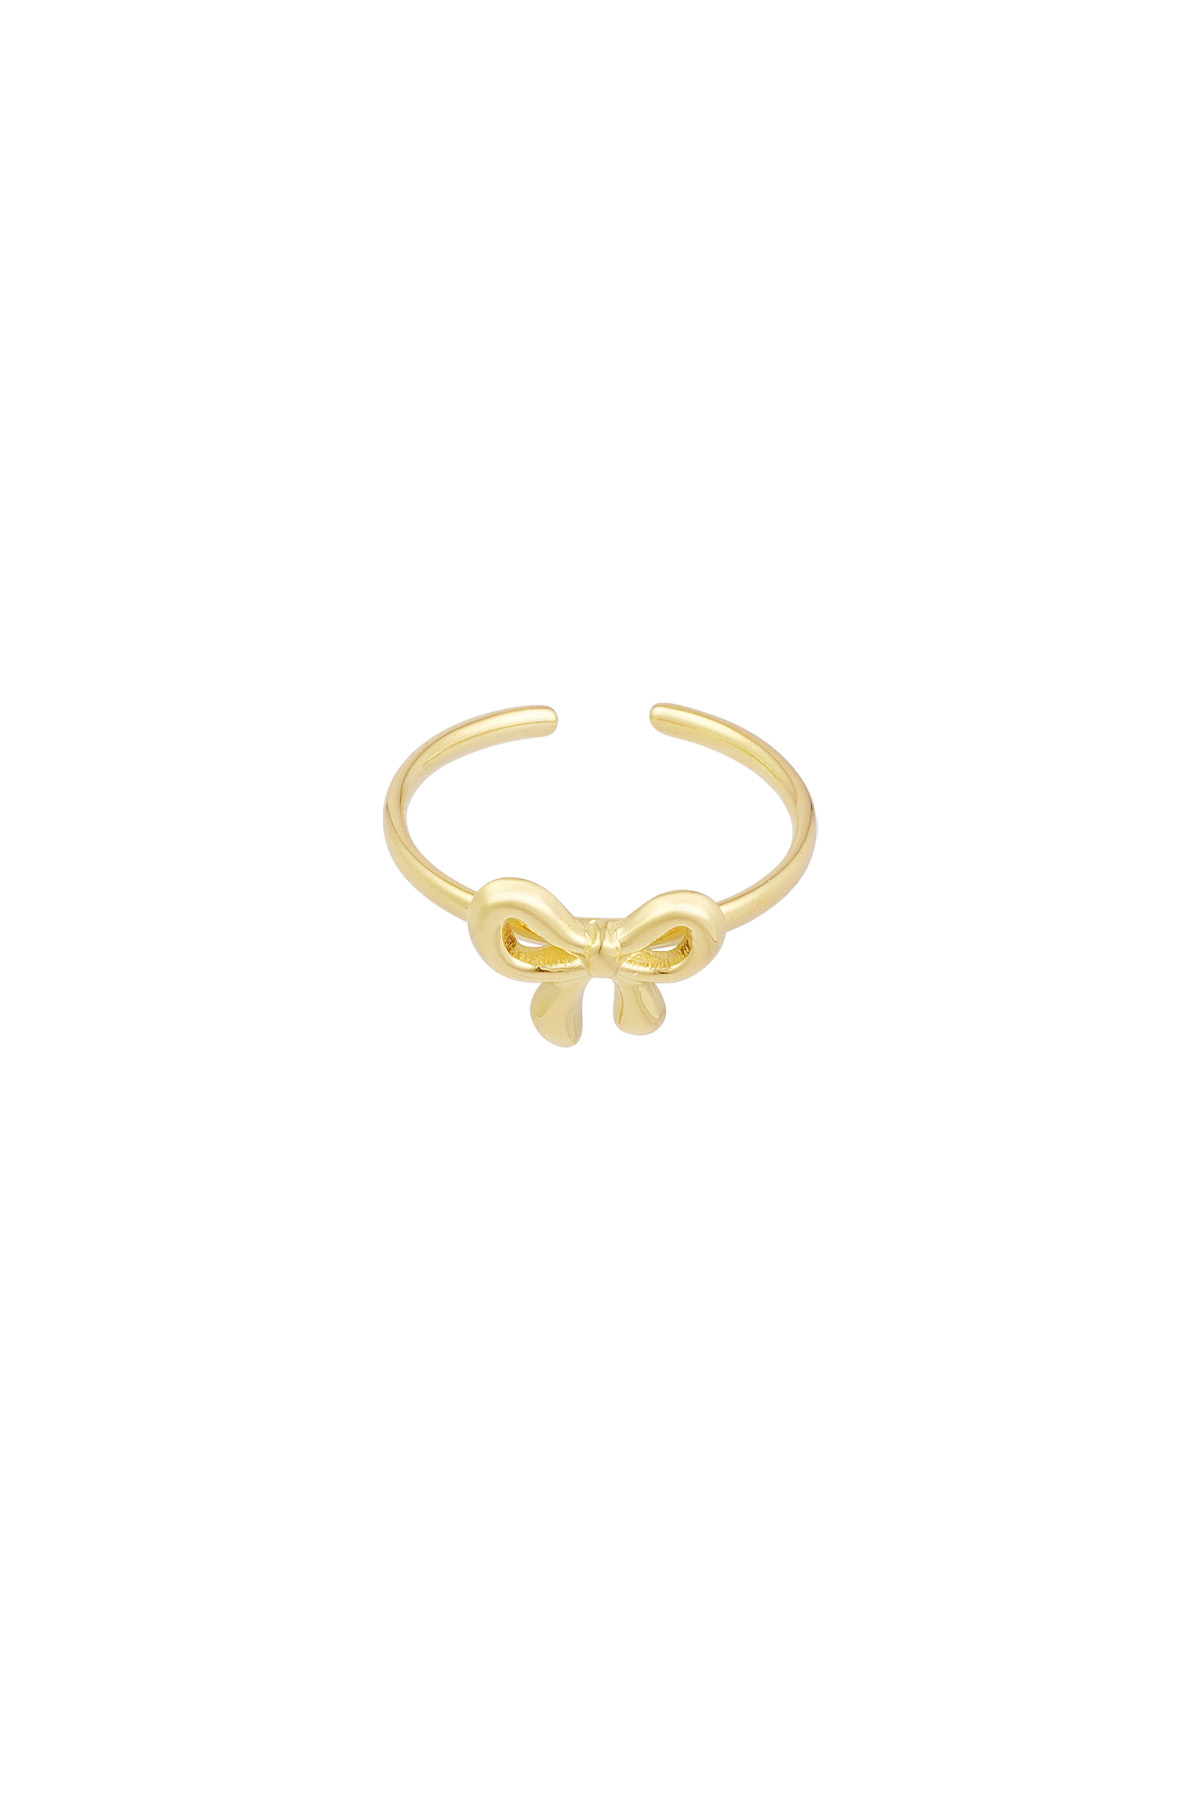 Ring bow life - gold 